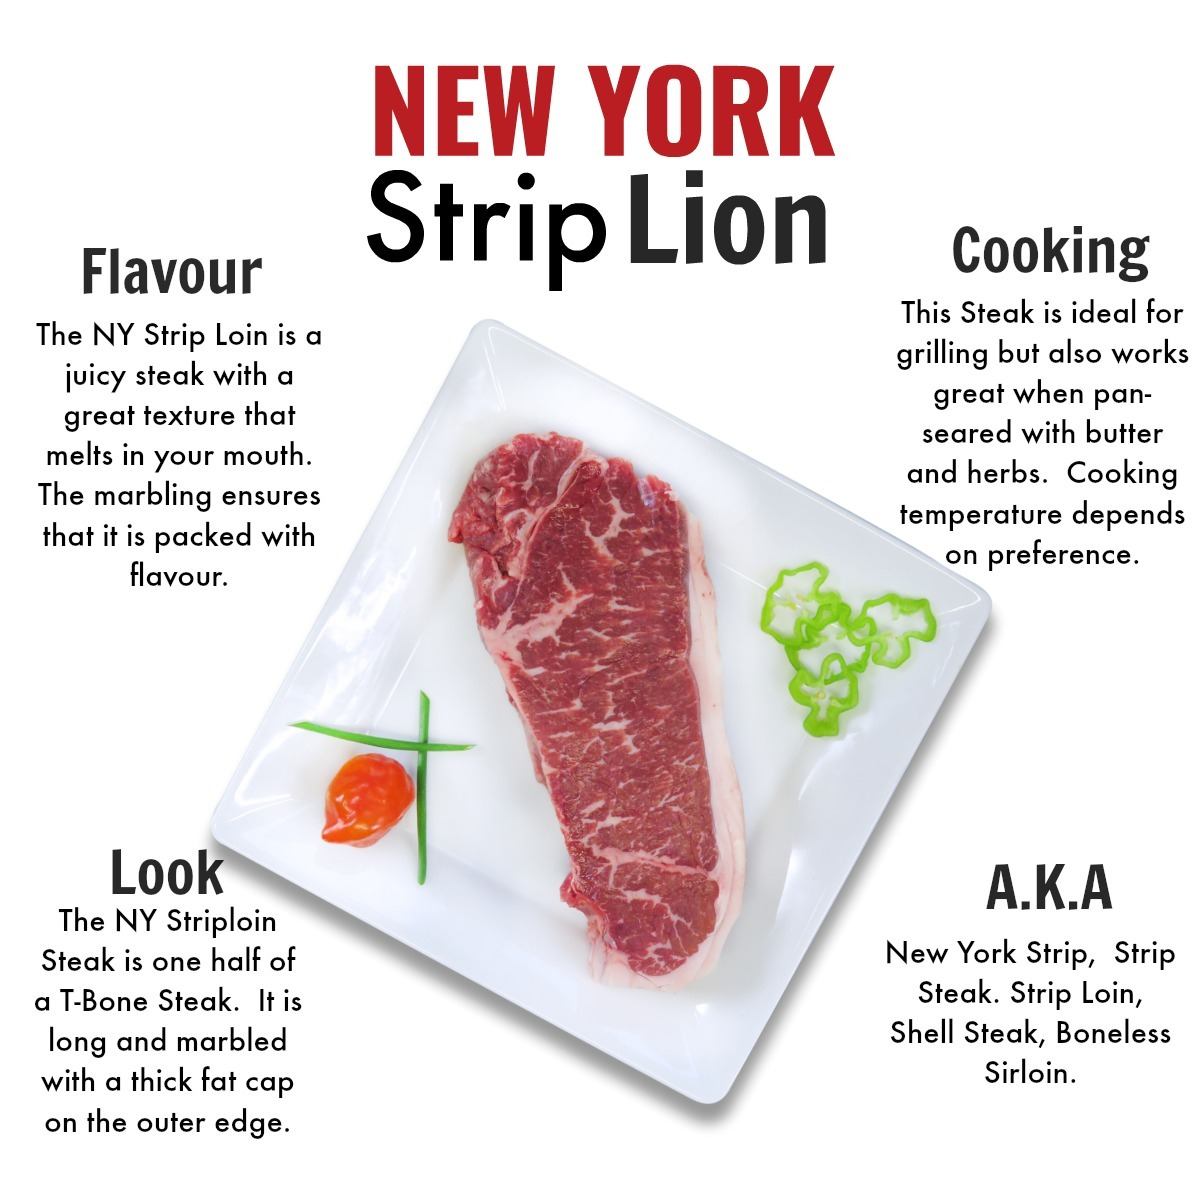 Affordable grass-fed beef delivery near me, steaks, ground beef and more - NY Strip Loin 2